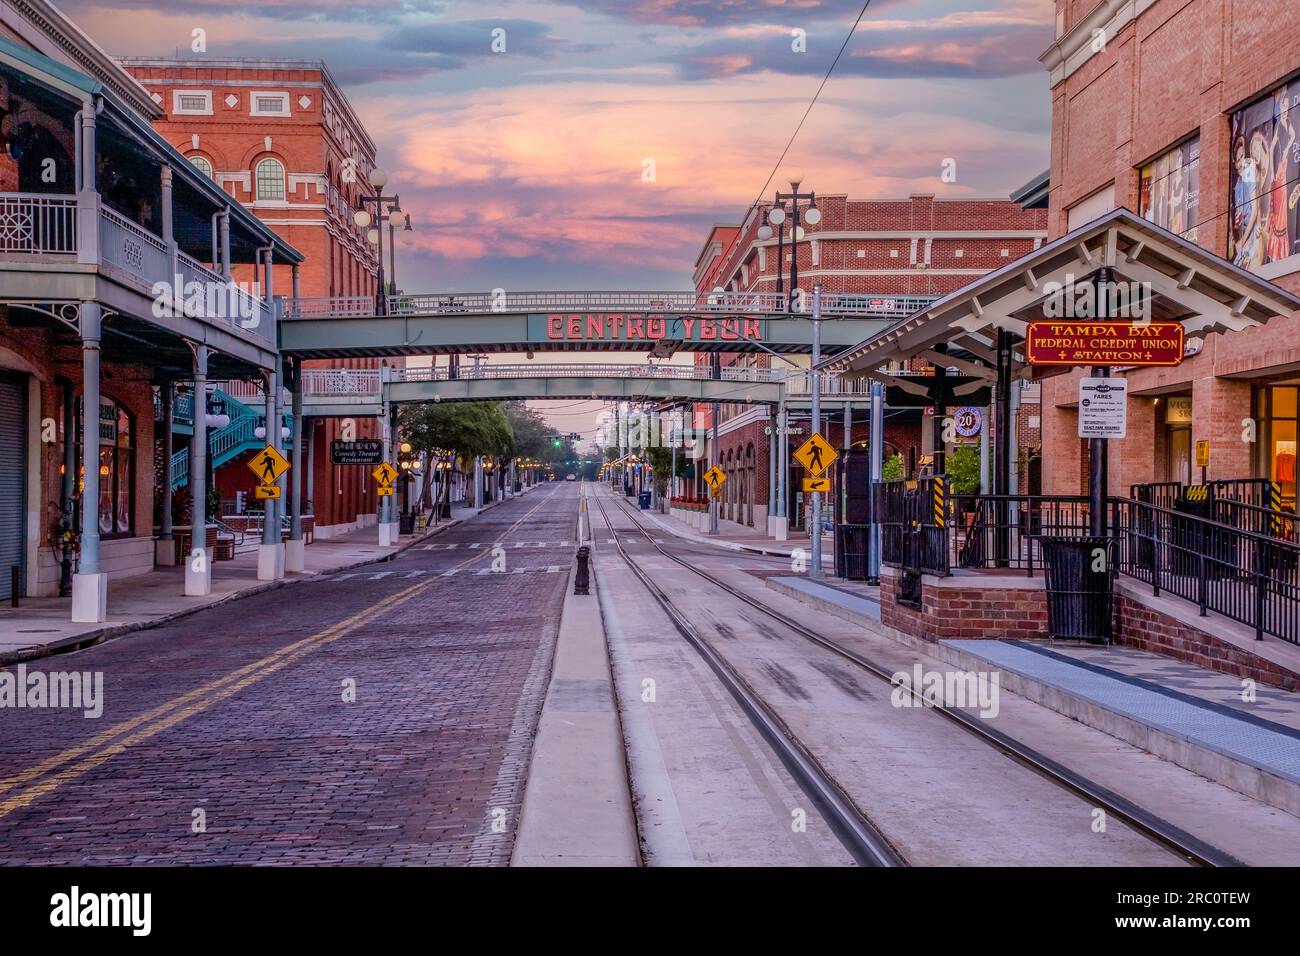 Centro Ybor, Ybor City on E. 8th Ave., between 15th and 17th Streets, Tampa, Fl. Stock Photo